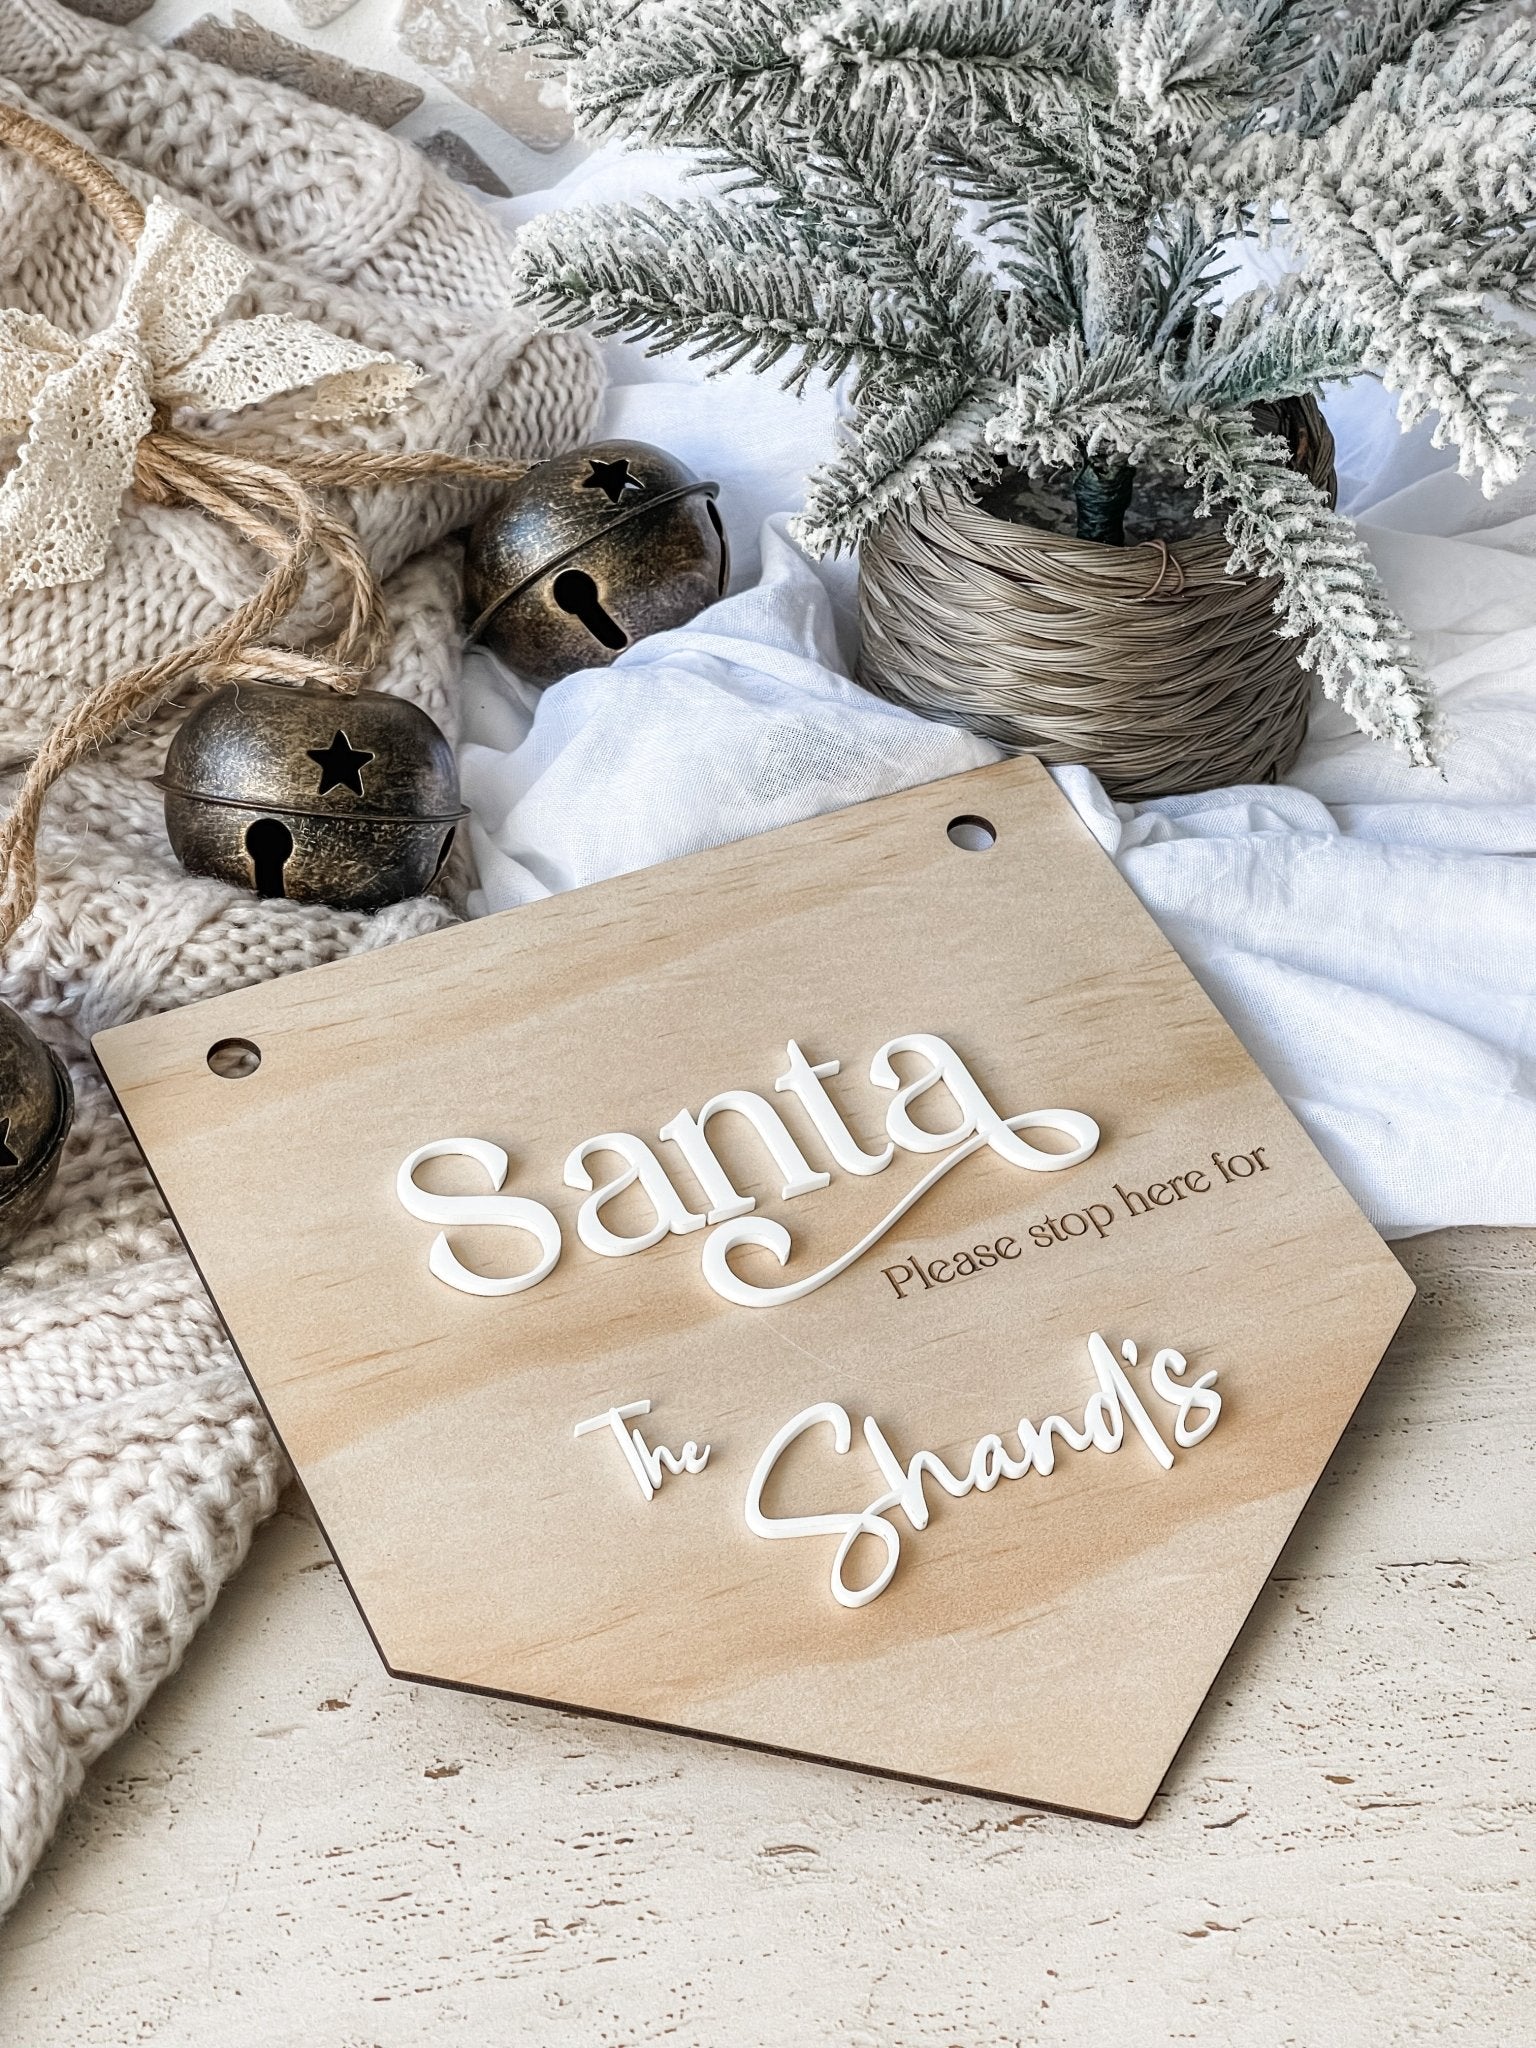 Santa Stop Here Sign - The Humble Gift Co.